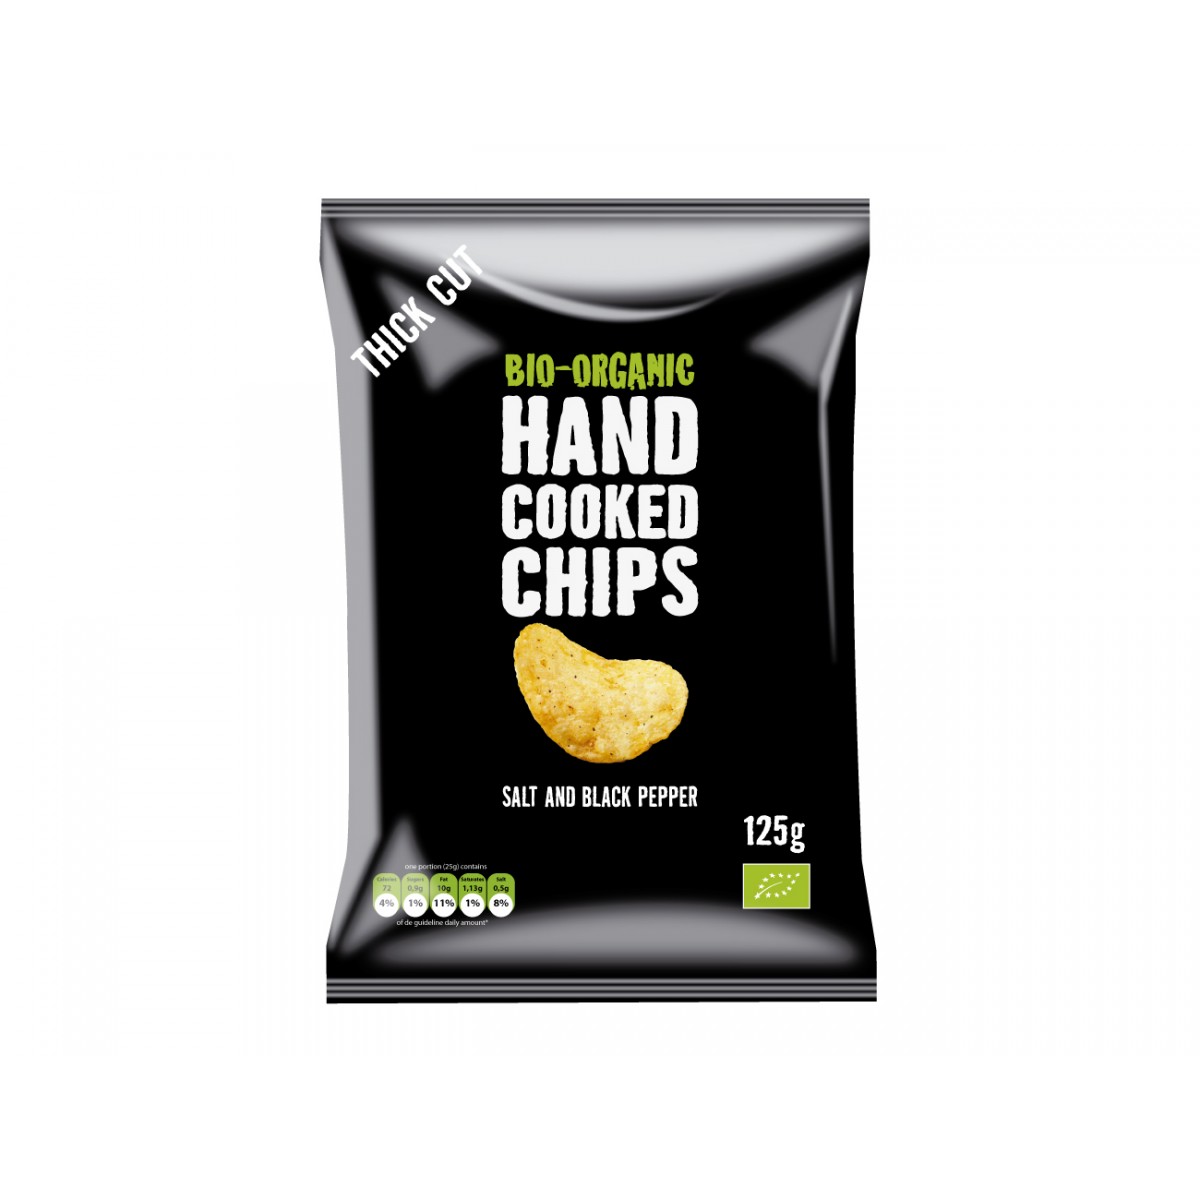 Handcooked Chips Salt And Black Pepper